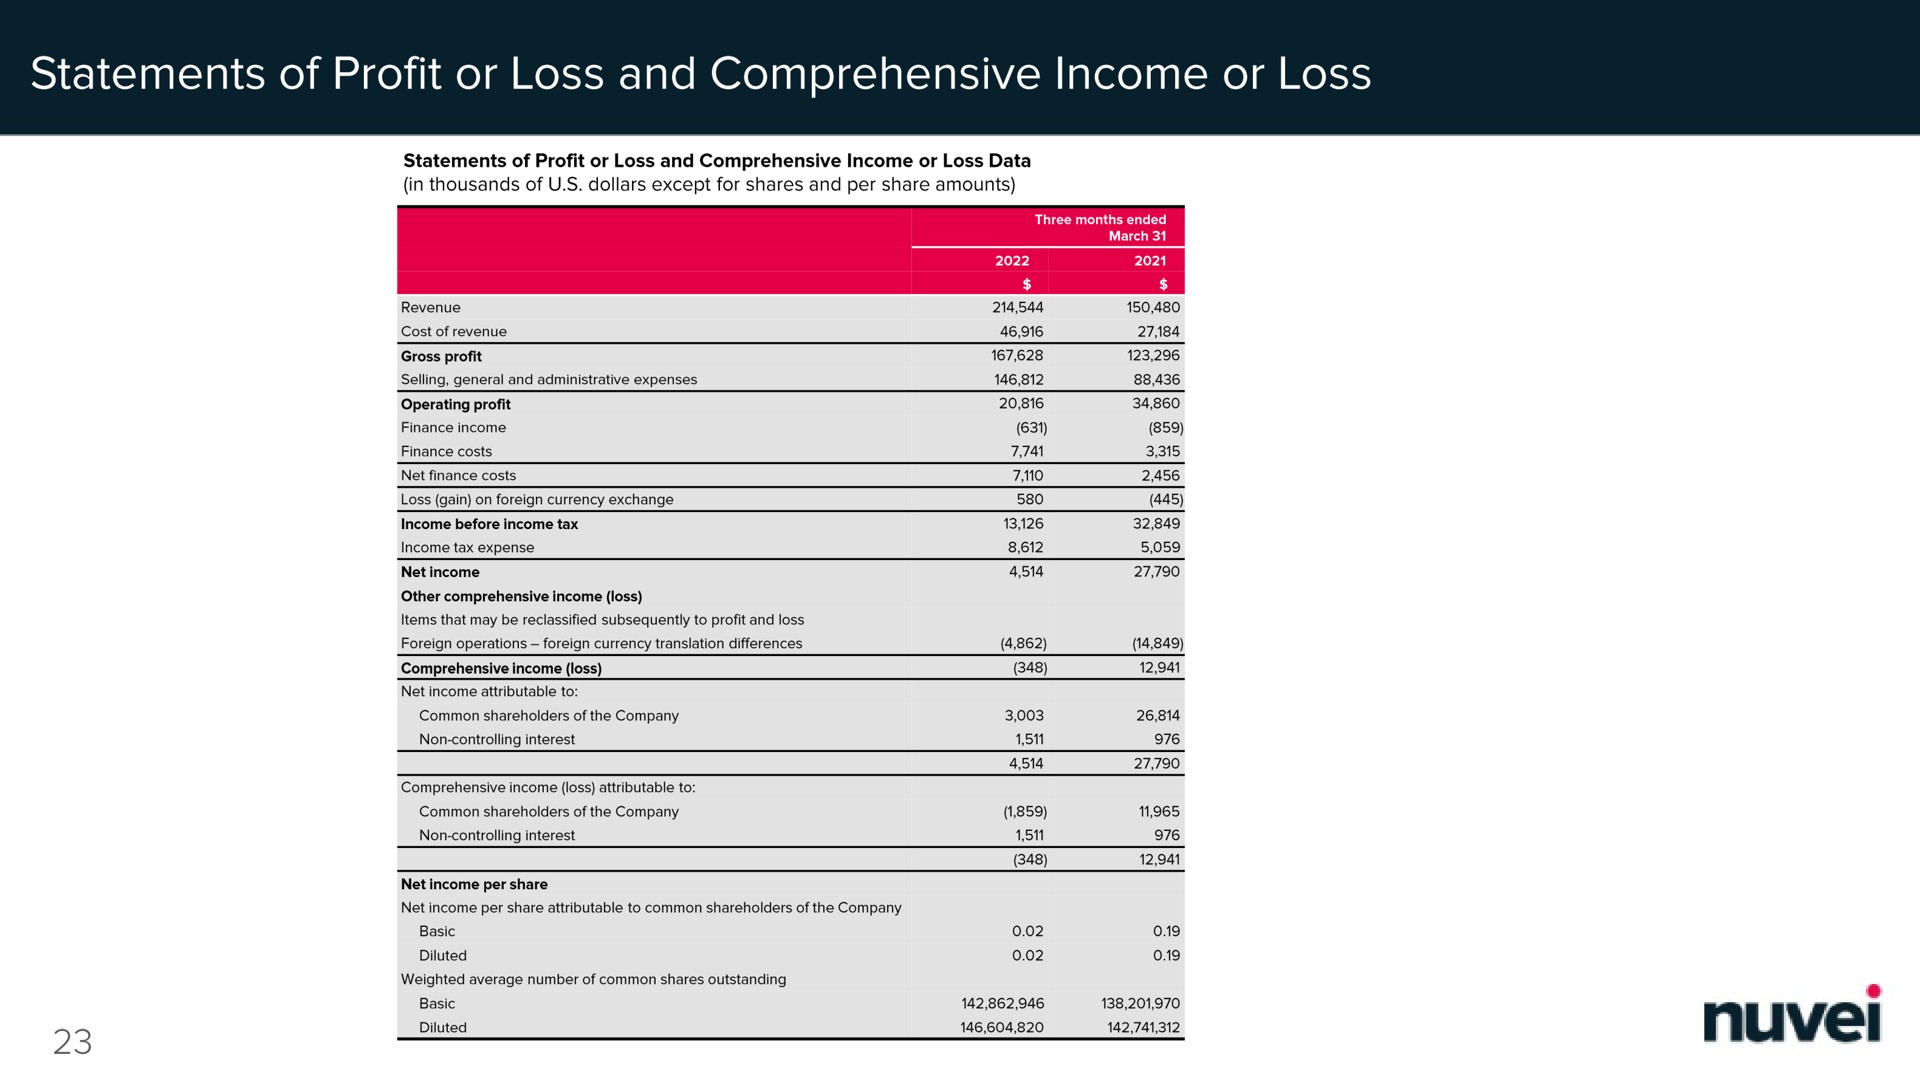 statements of profit or loss and comprehensive income or loss | Nuvei